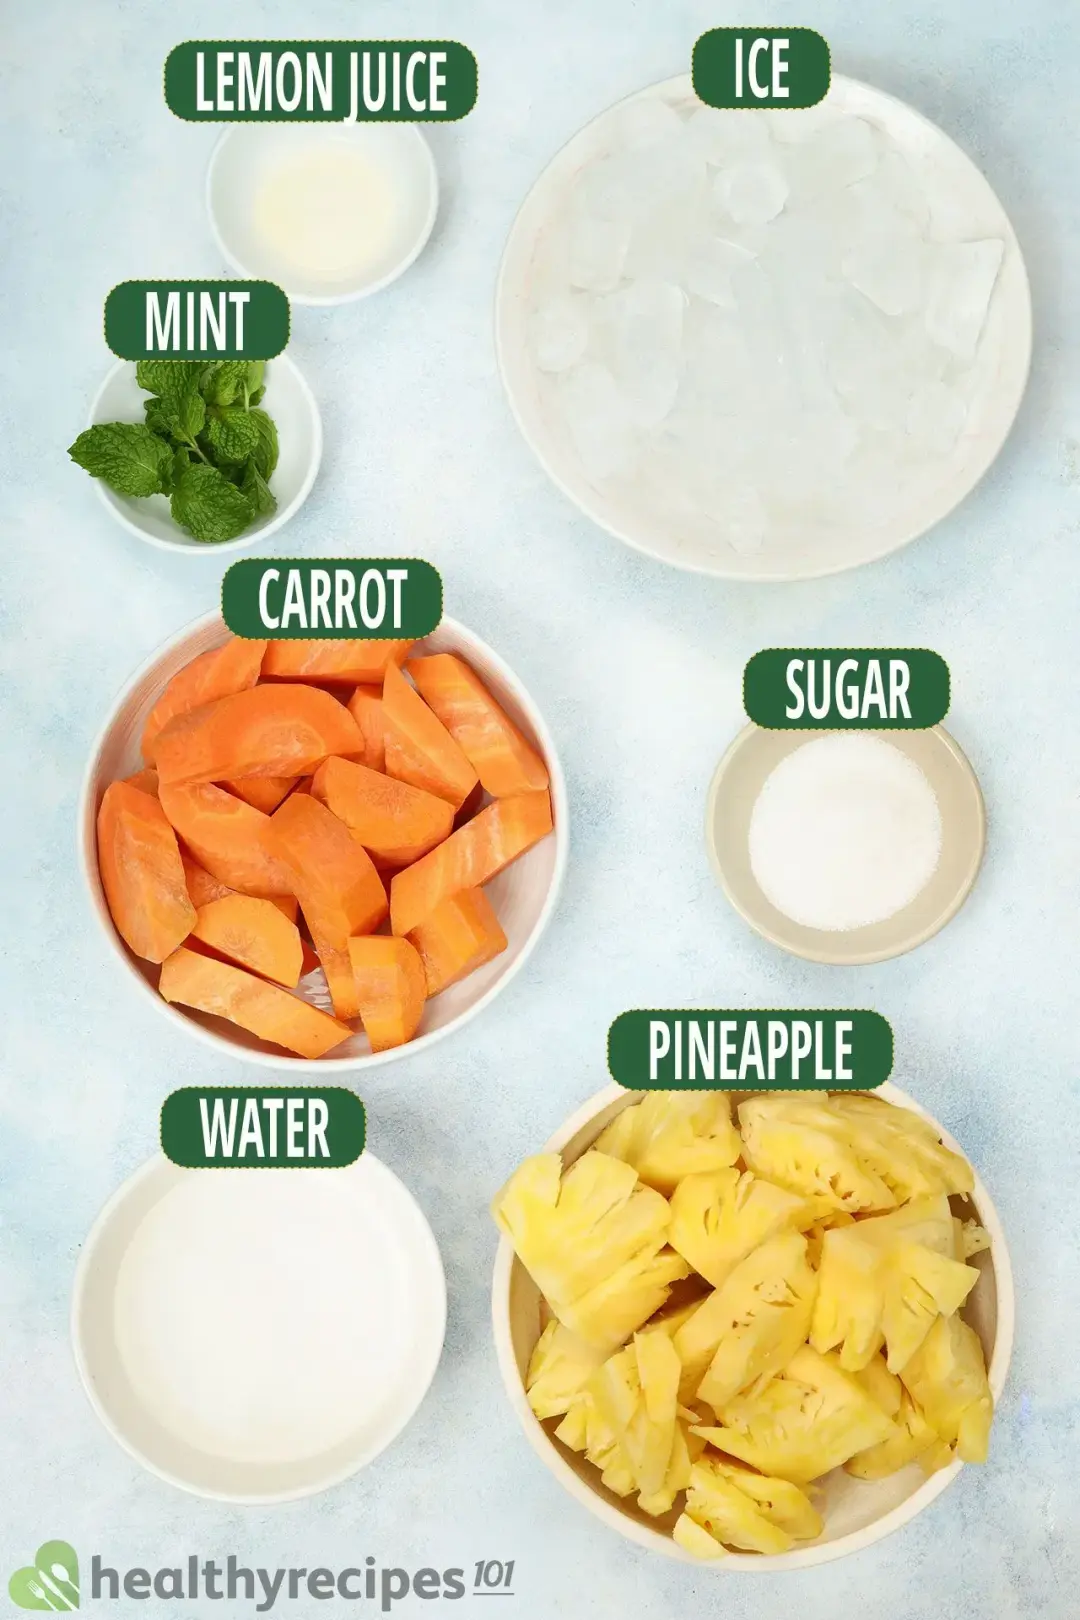 Ingredients for Pineapple Carrot Juice